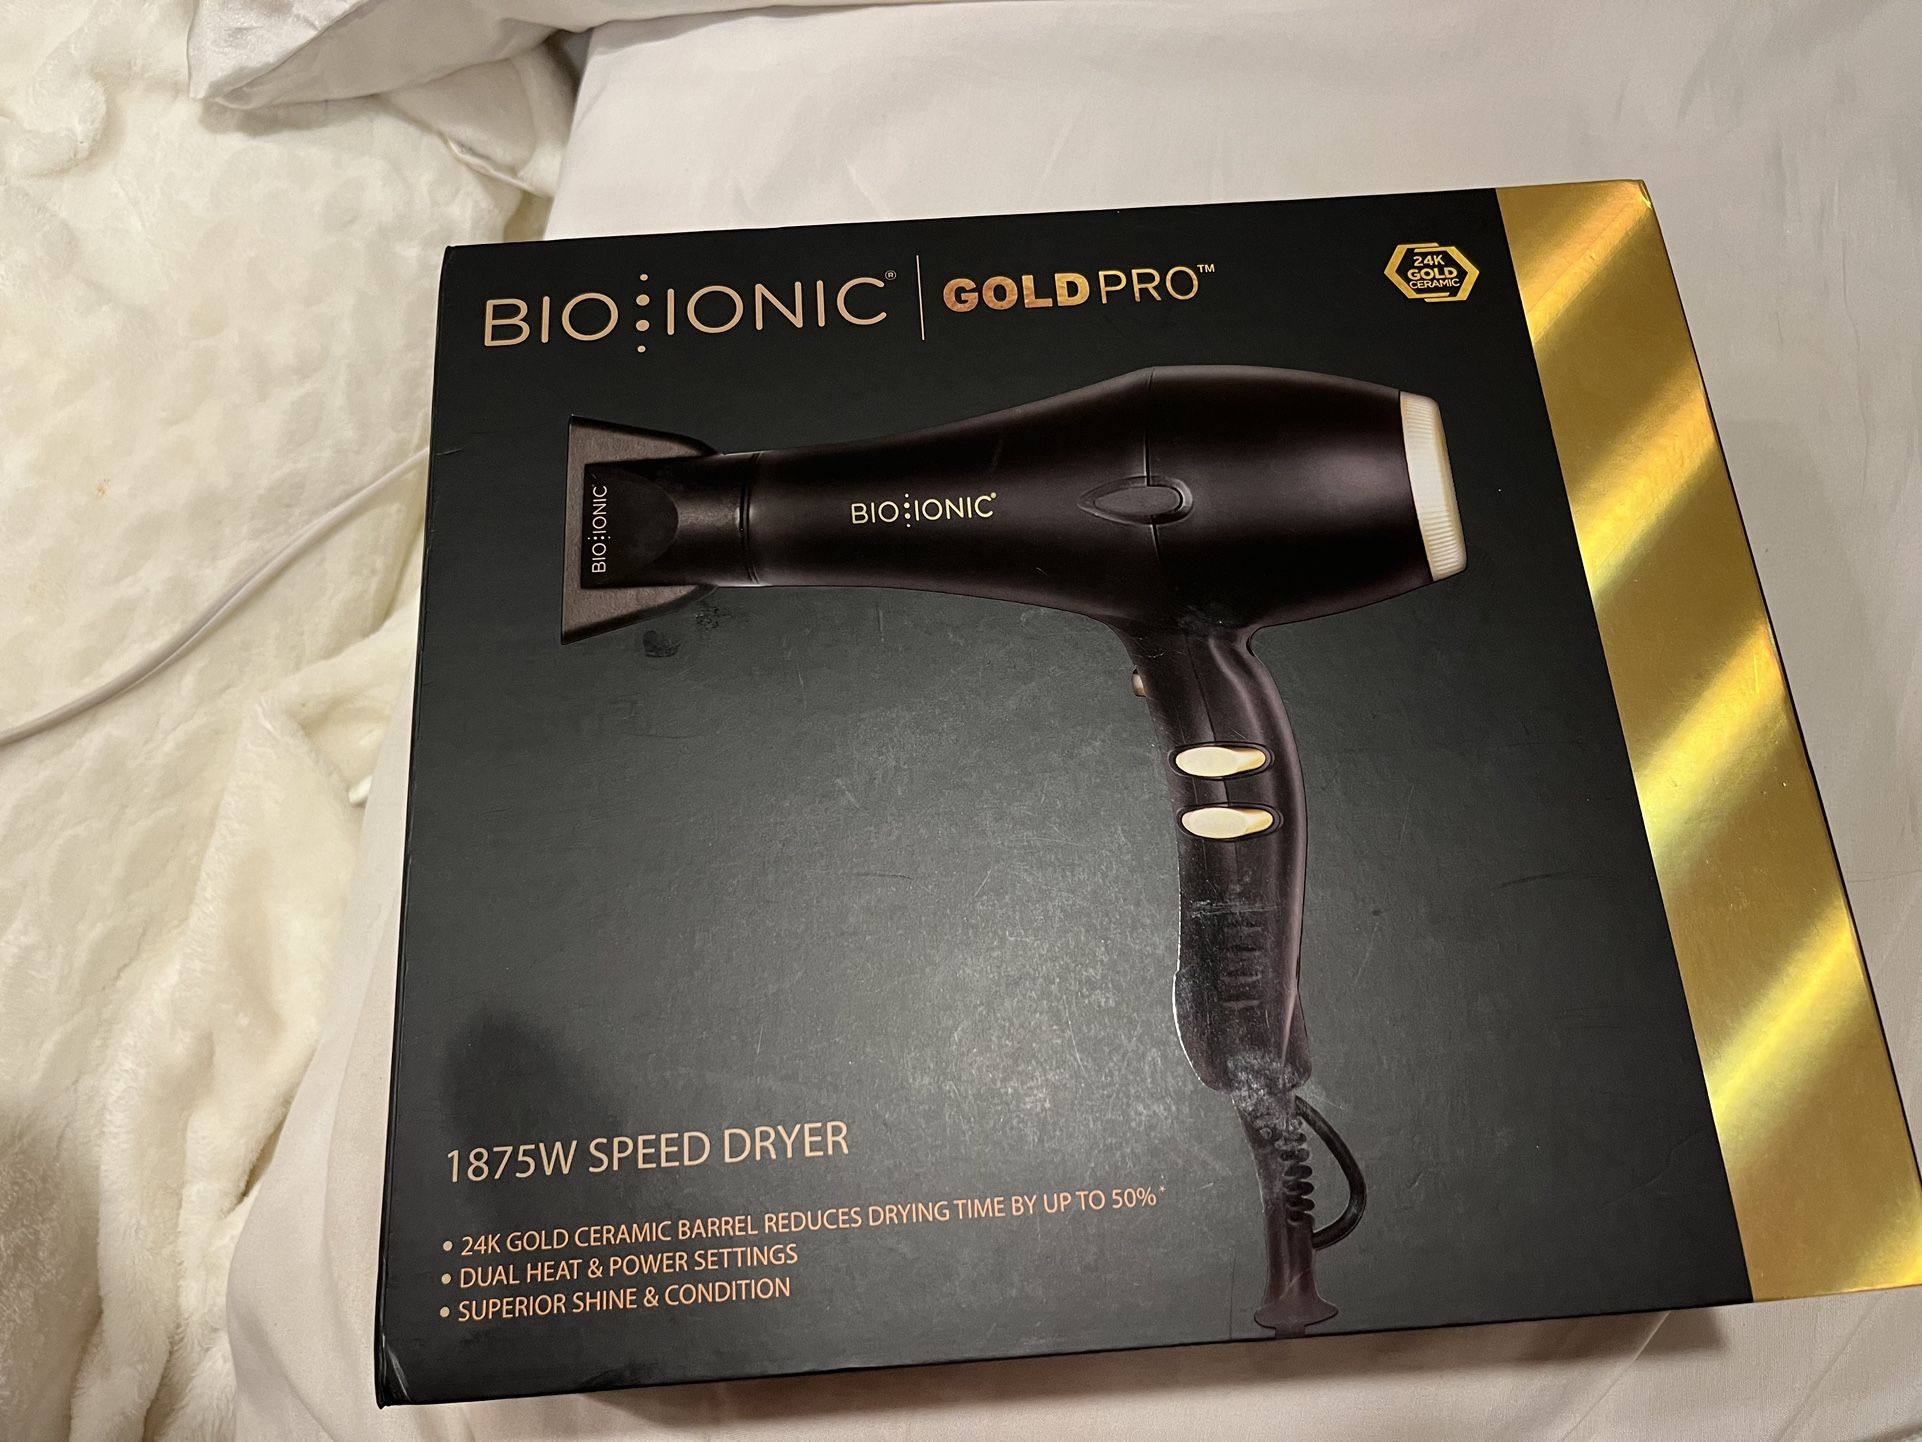 Bio ionic gold plus hair dryer never used